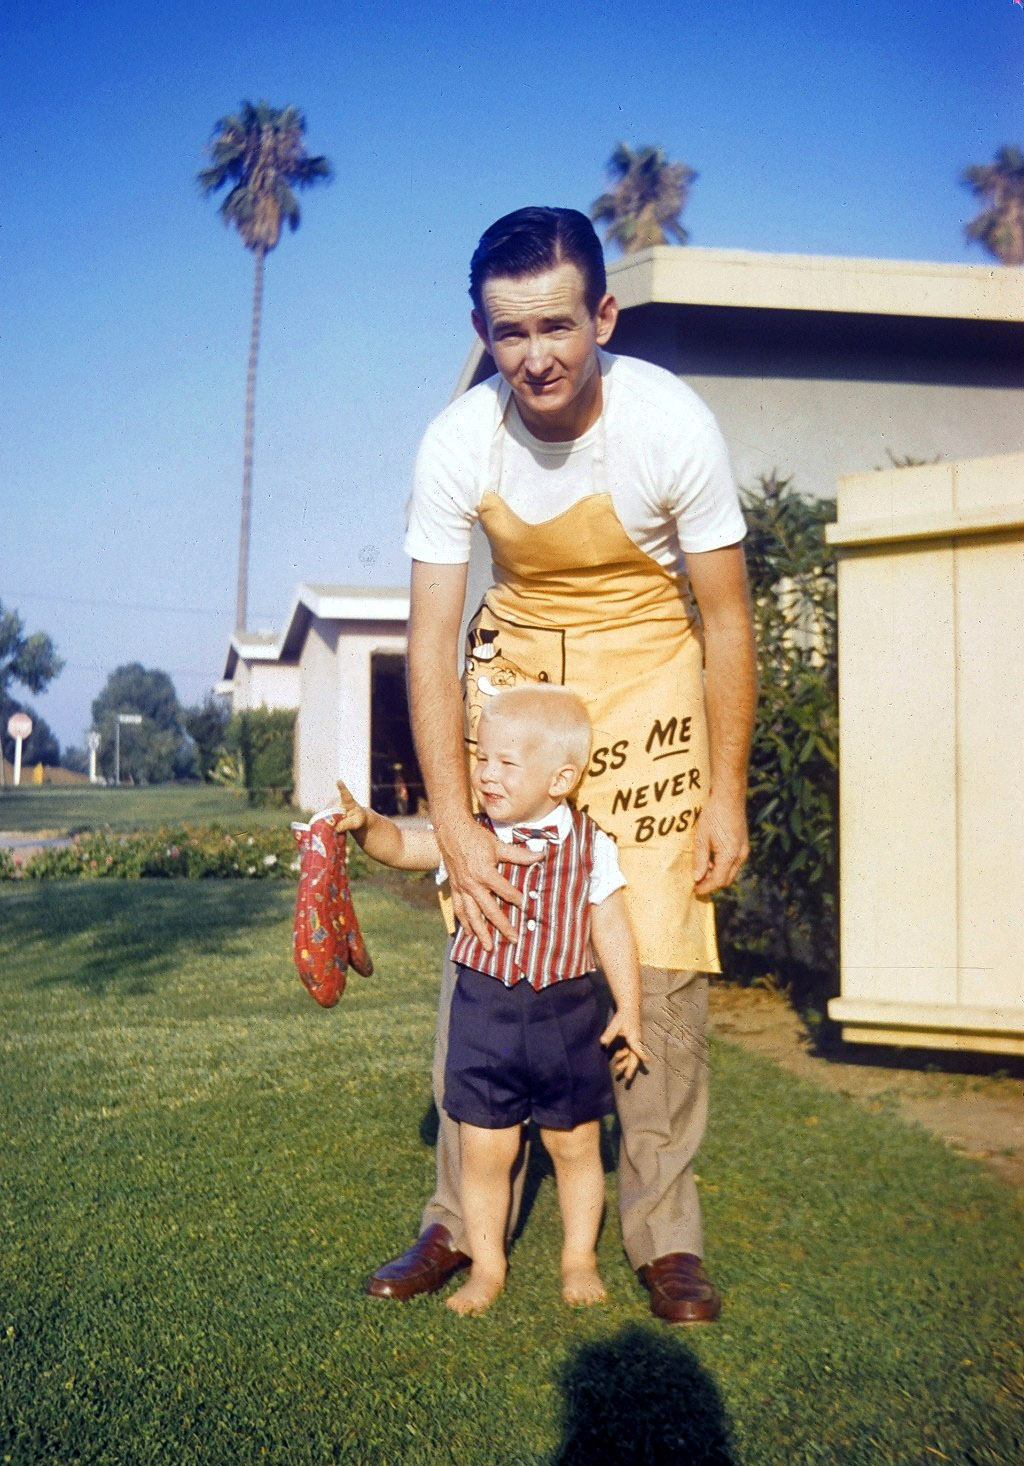 Daddy taking a break from the BBQ in West Covina, California, circa 1957. Mother took the picture and you can see her shadow. West Covina was one of the new suburbs east of Los Angeles back in the nifty 50s. Dad was a decorated combat veteran from the Korean War, and used his VA benefits to buy two homes. This was the first. This was a great place. I had wonderful friends and neighbors. My folks have often said this was the best place they have ever lived. Neighbors were friendly and they socialized with each other. There was an air raid siren nearby that went off twice a month as a test. This was the height of the cold war, but what did we know. View full size.